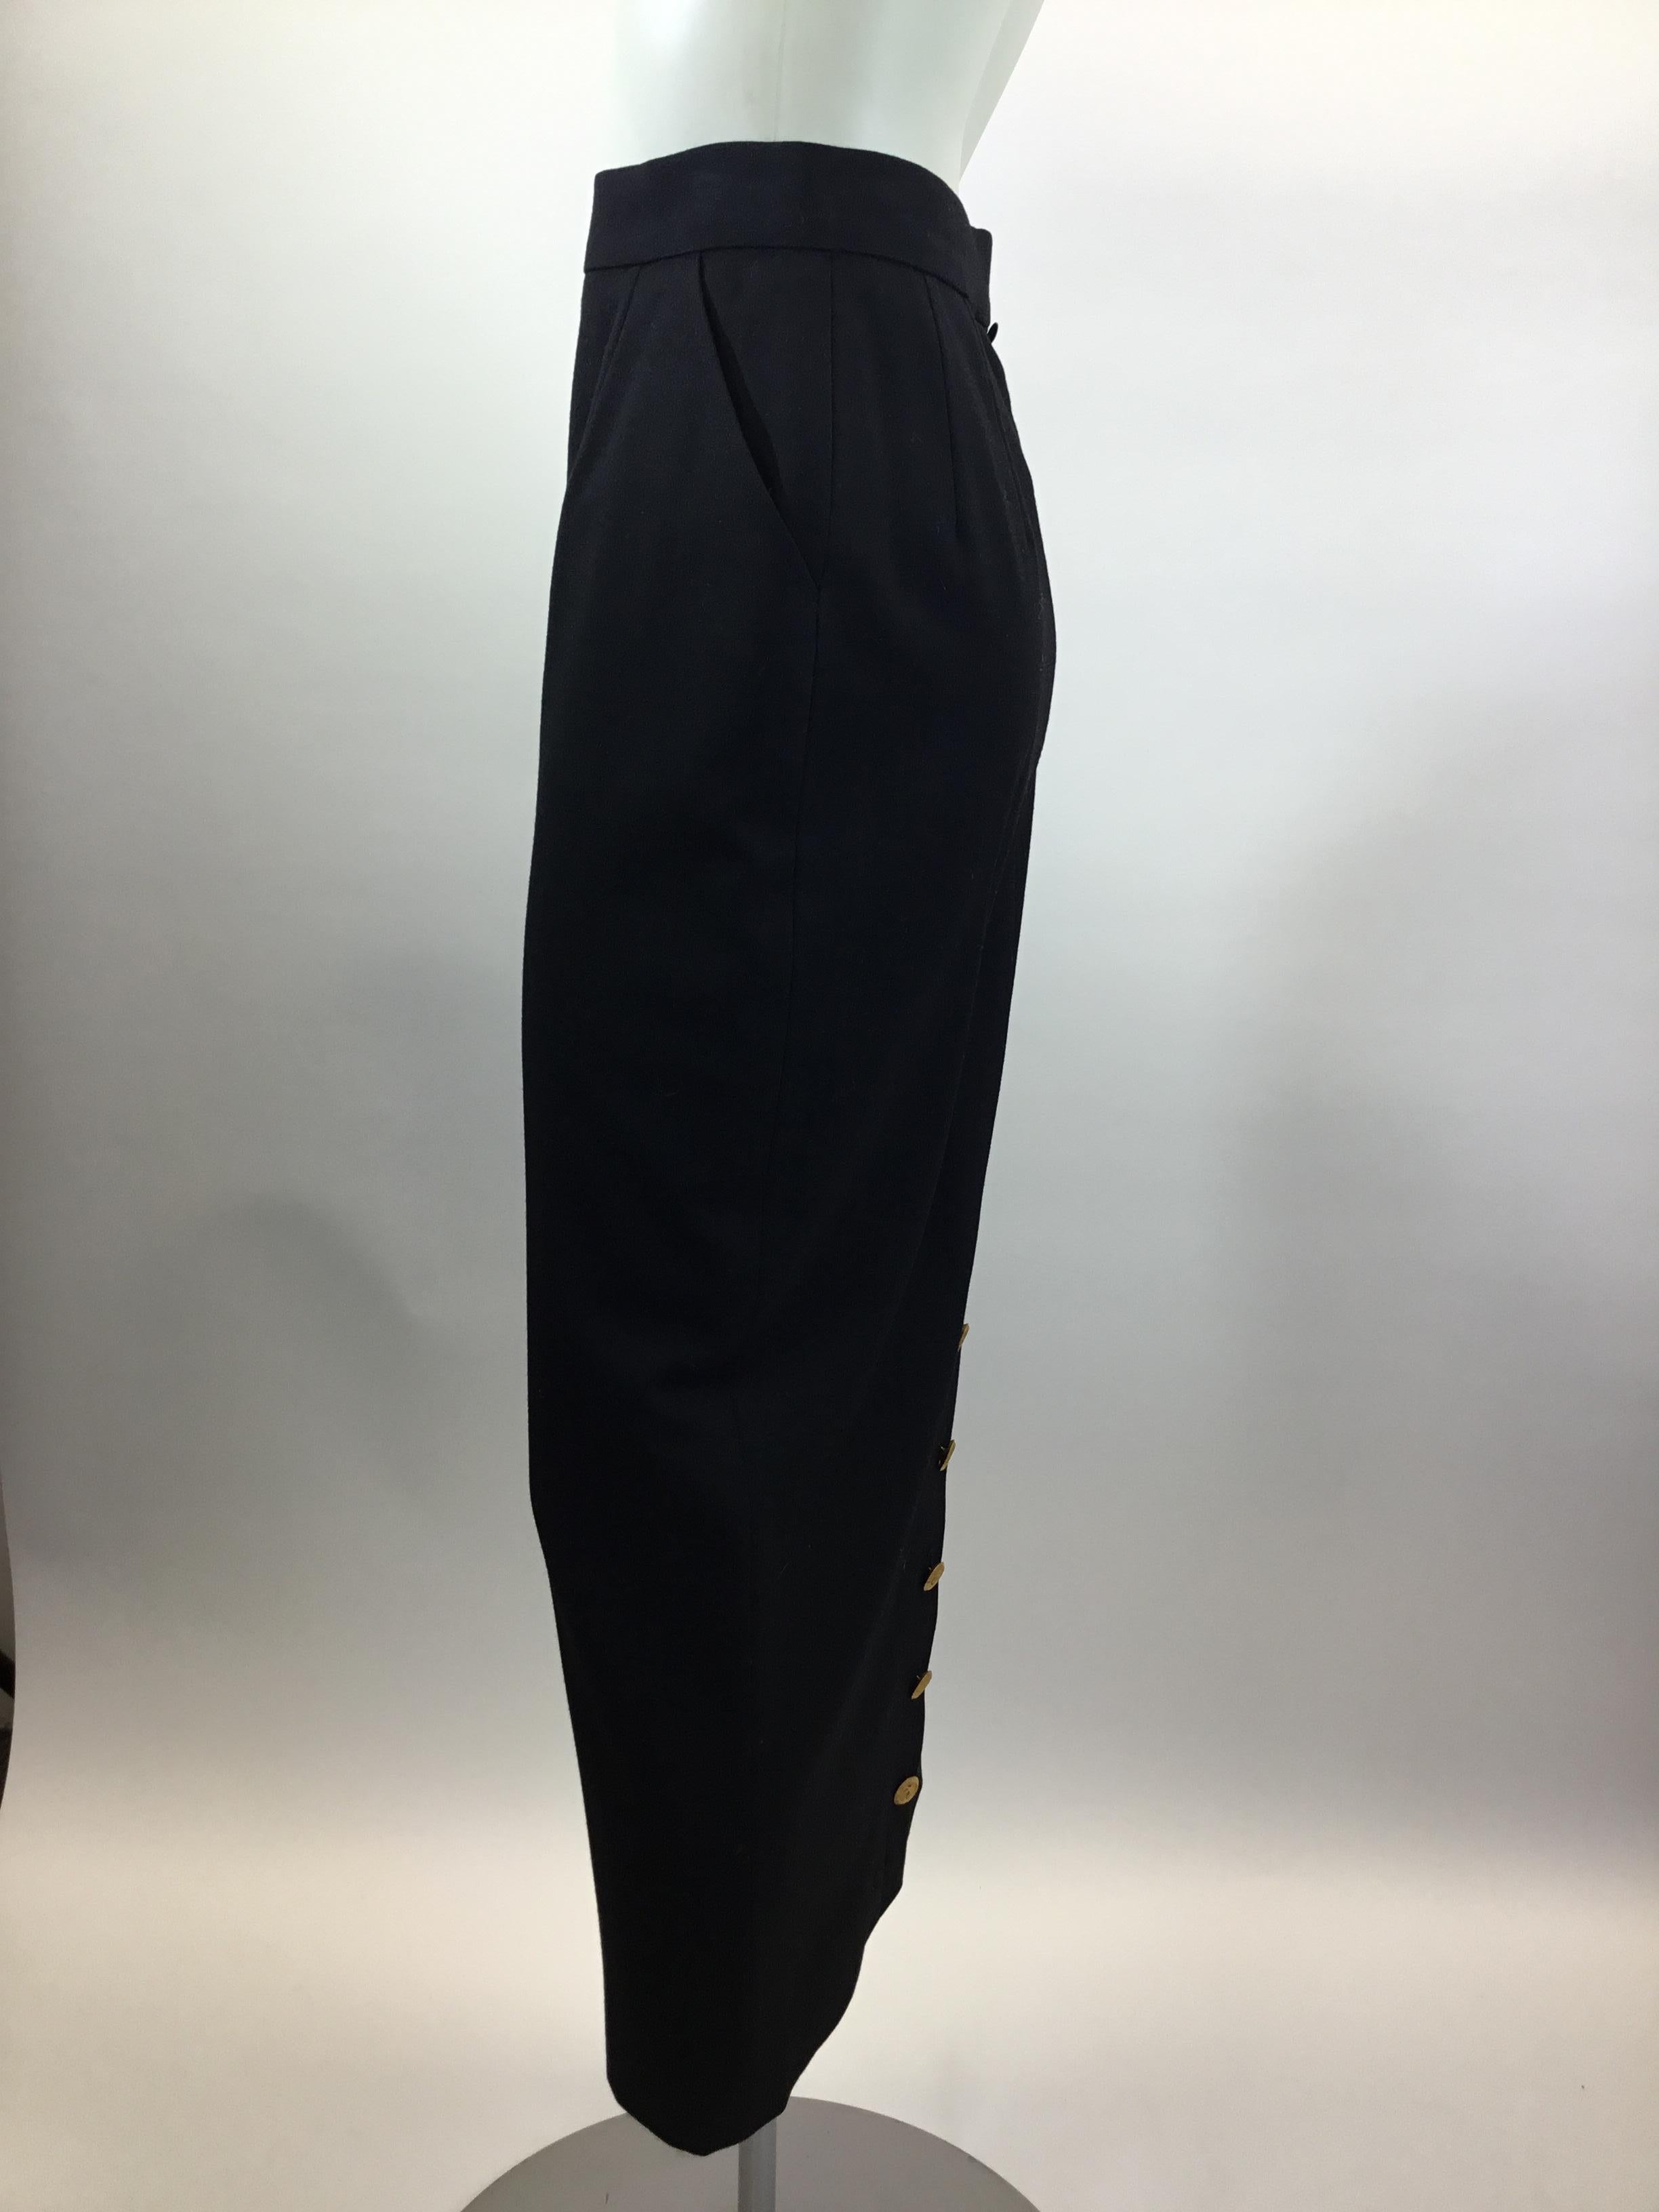 Chanel Black Mid-Length Skirt with Gold Buttons
$199
Made in France
Length 34”
Waist 24”
Hip 33”